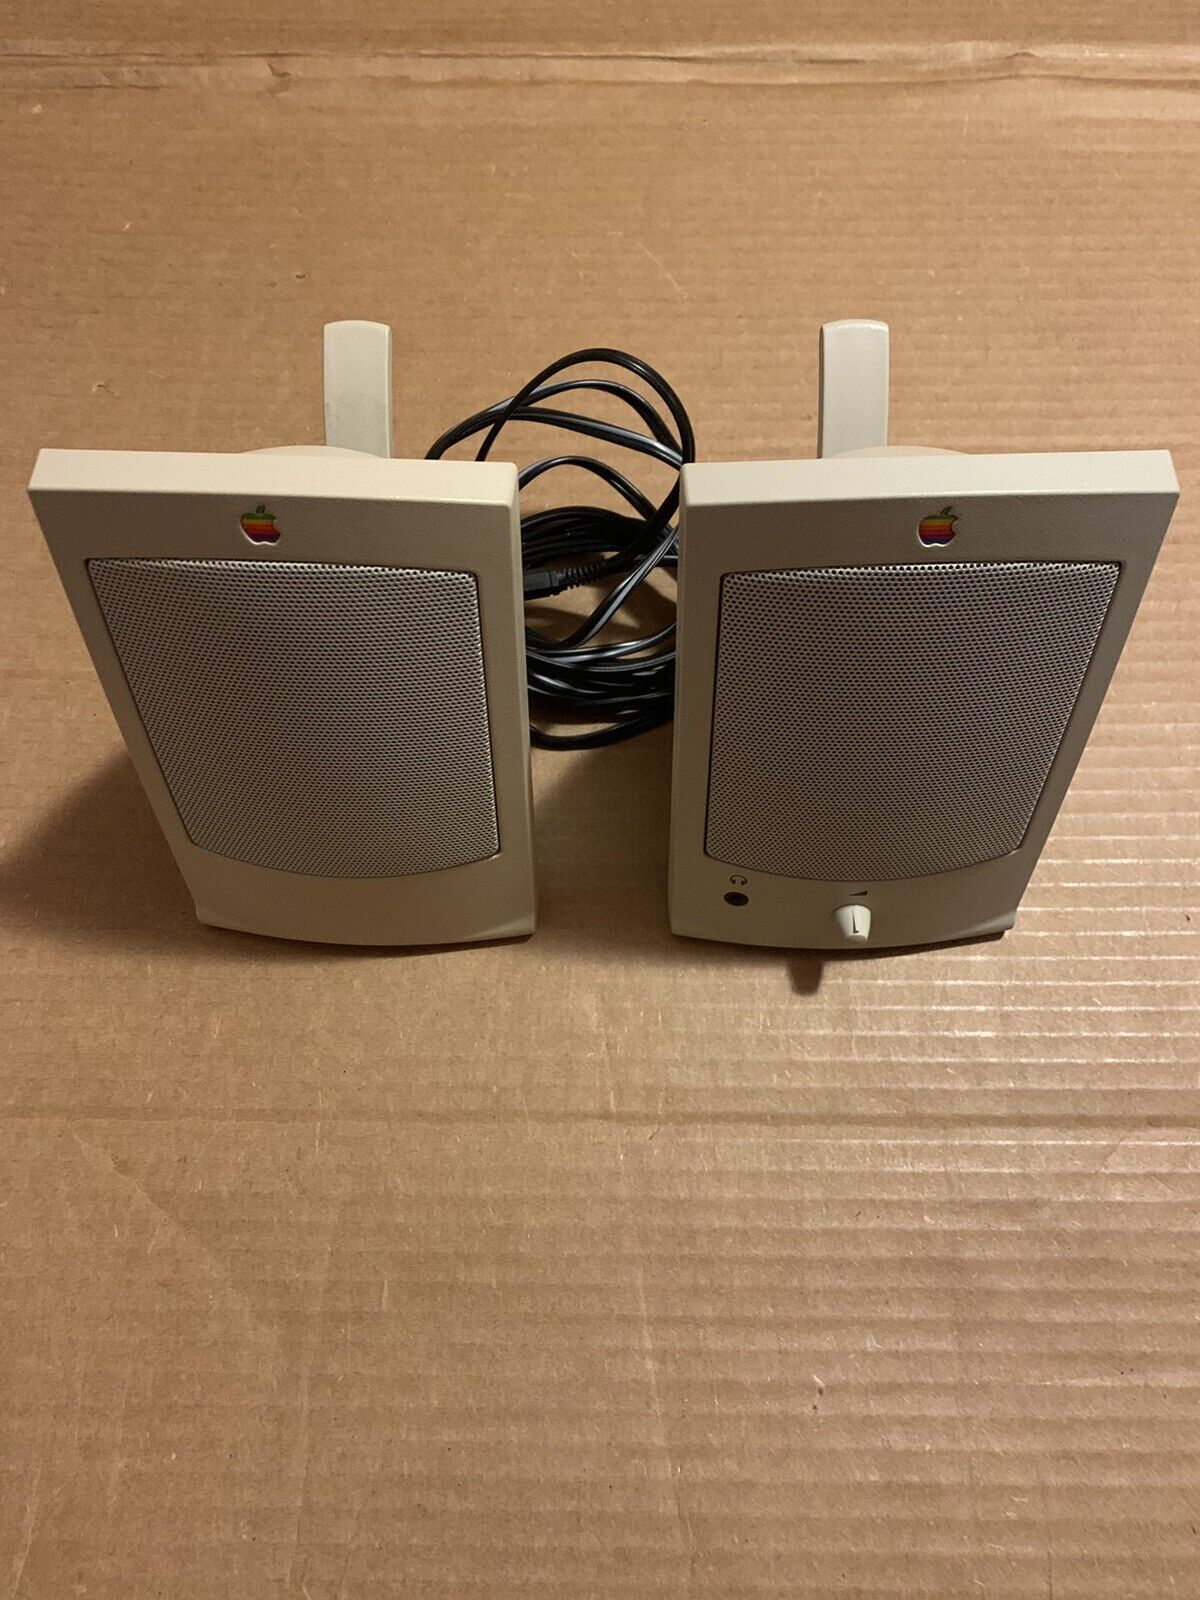 Vintage Appledesign M2497 Ii Speakers With All Cables Tested & Working Complete